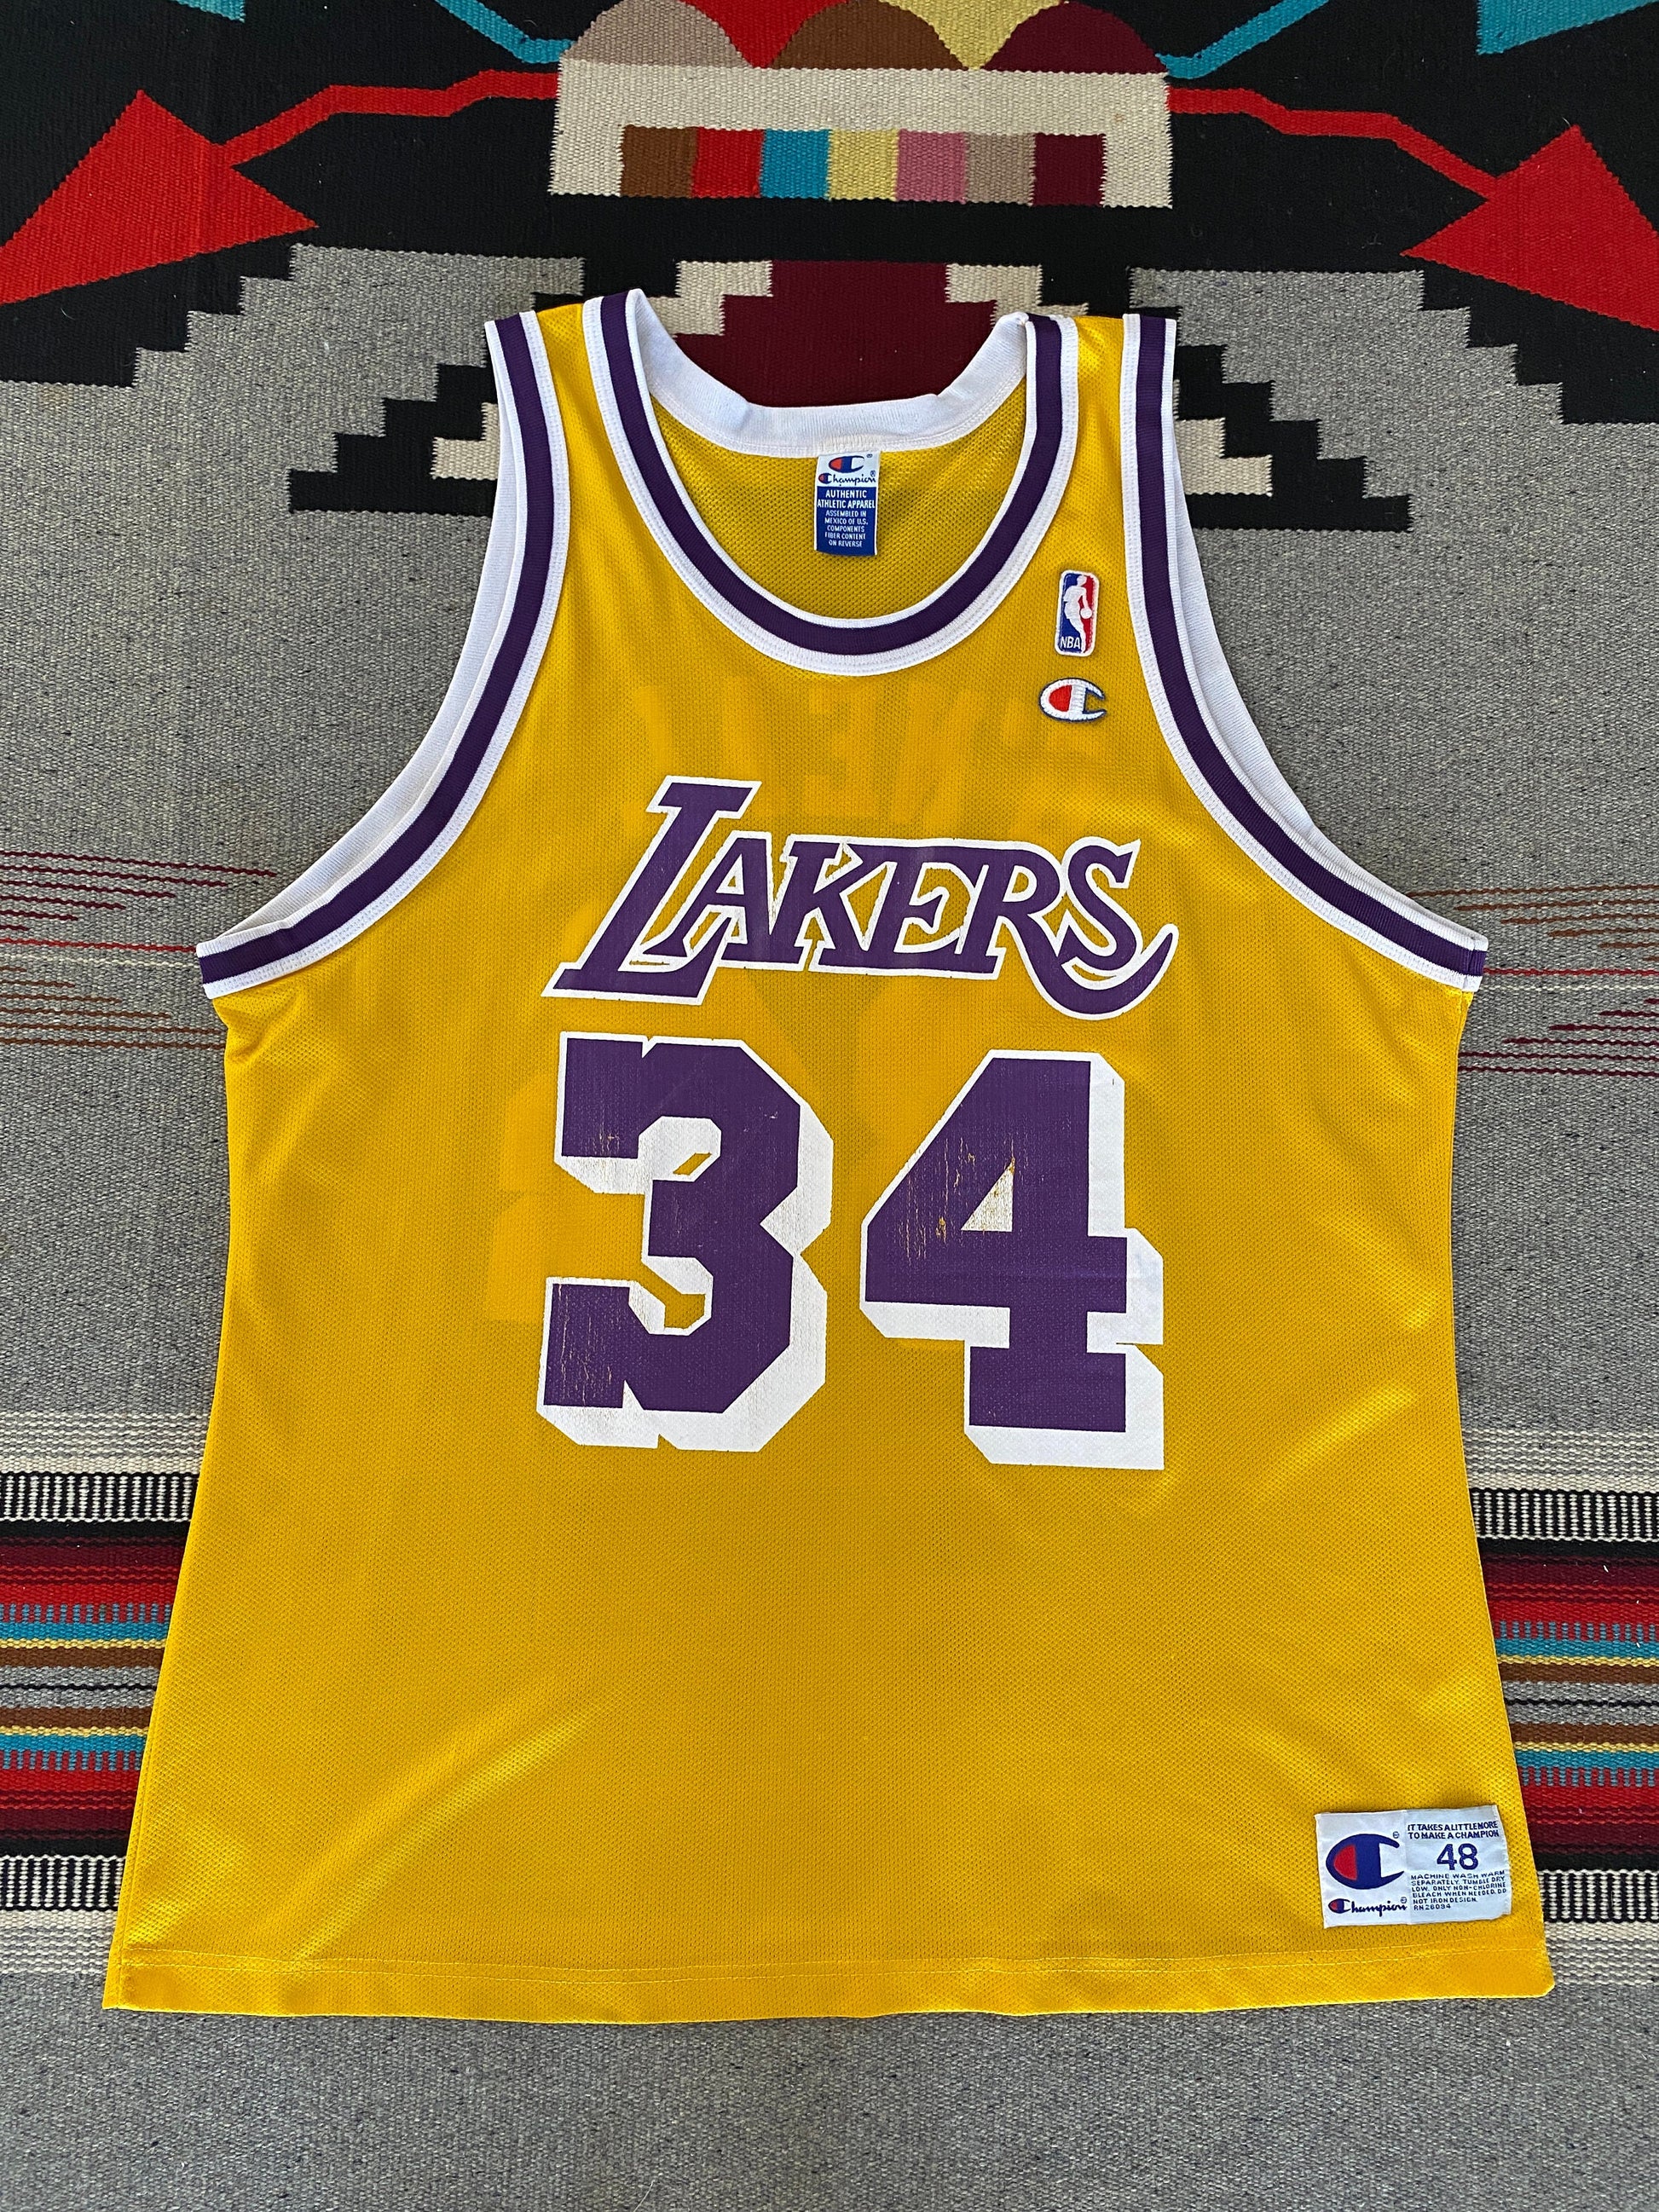 Size 48 Shaquille O'Neal #34 LA Lakers Vintage NBA Champion Jersey - Front View